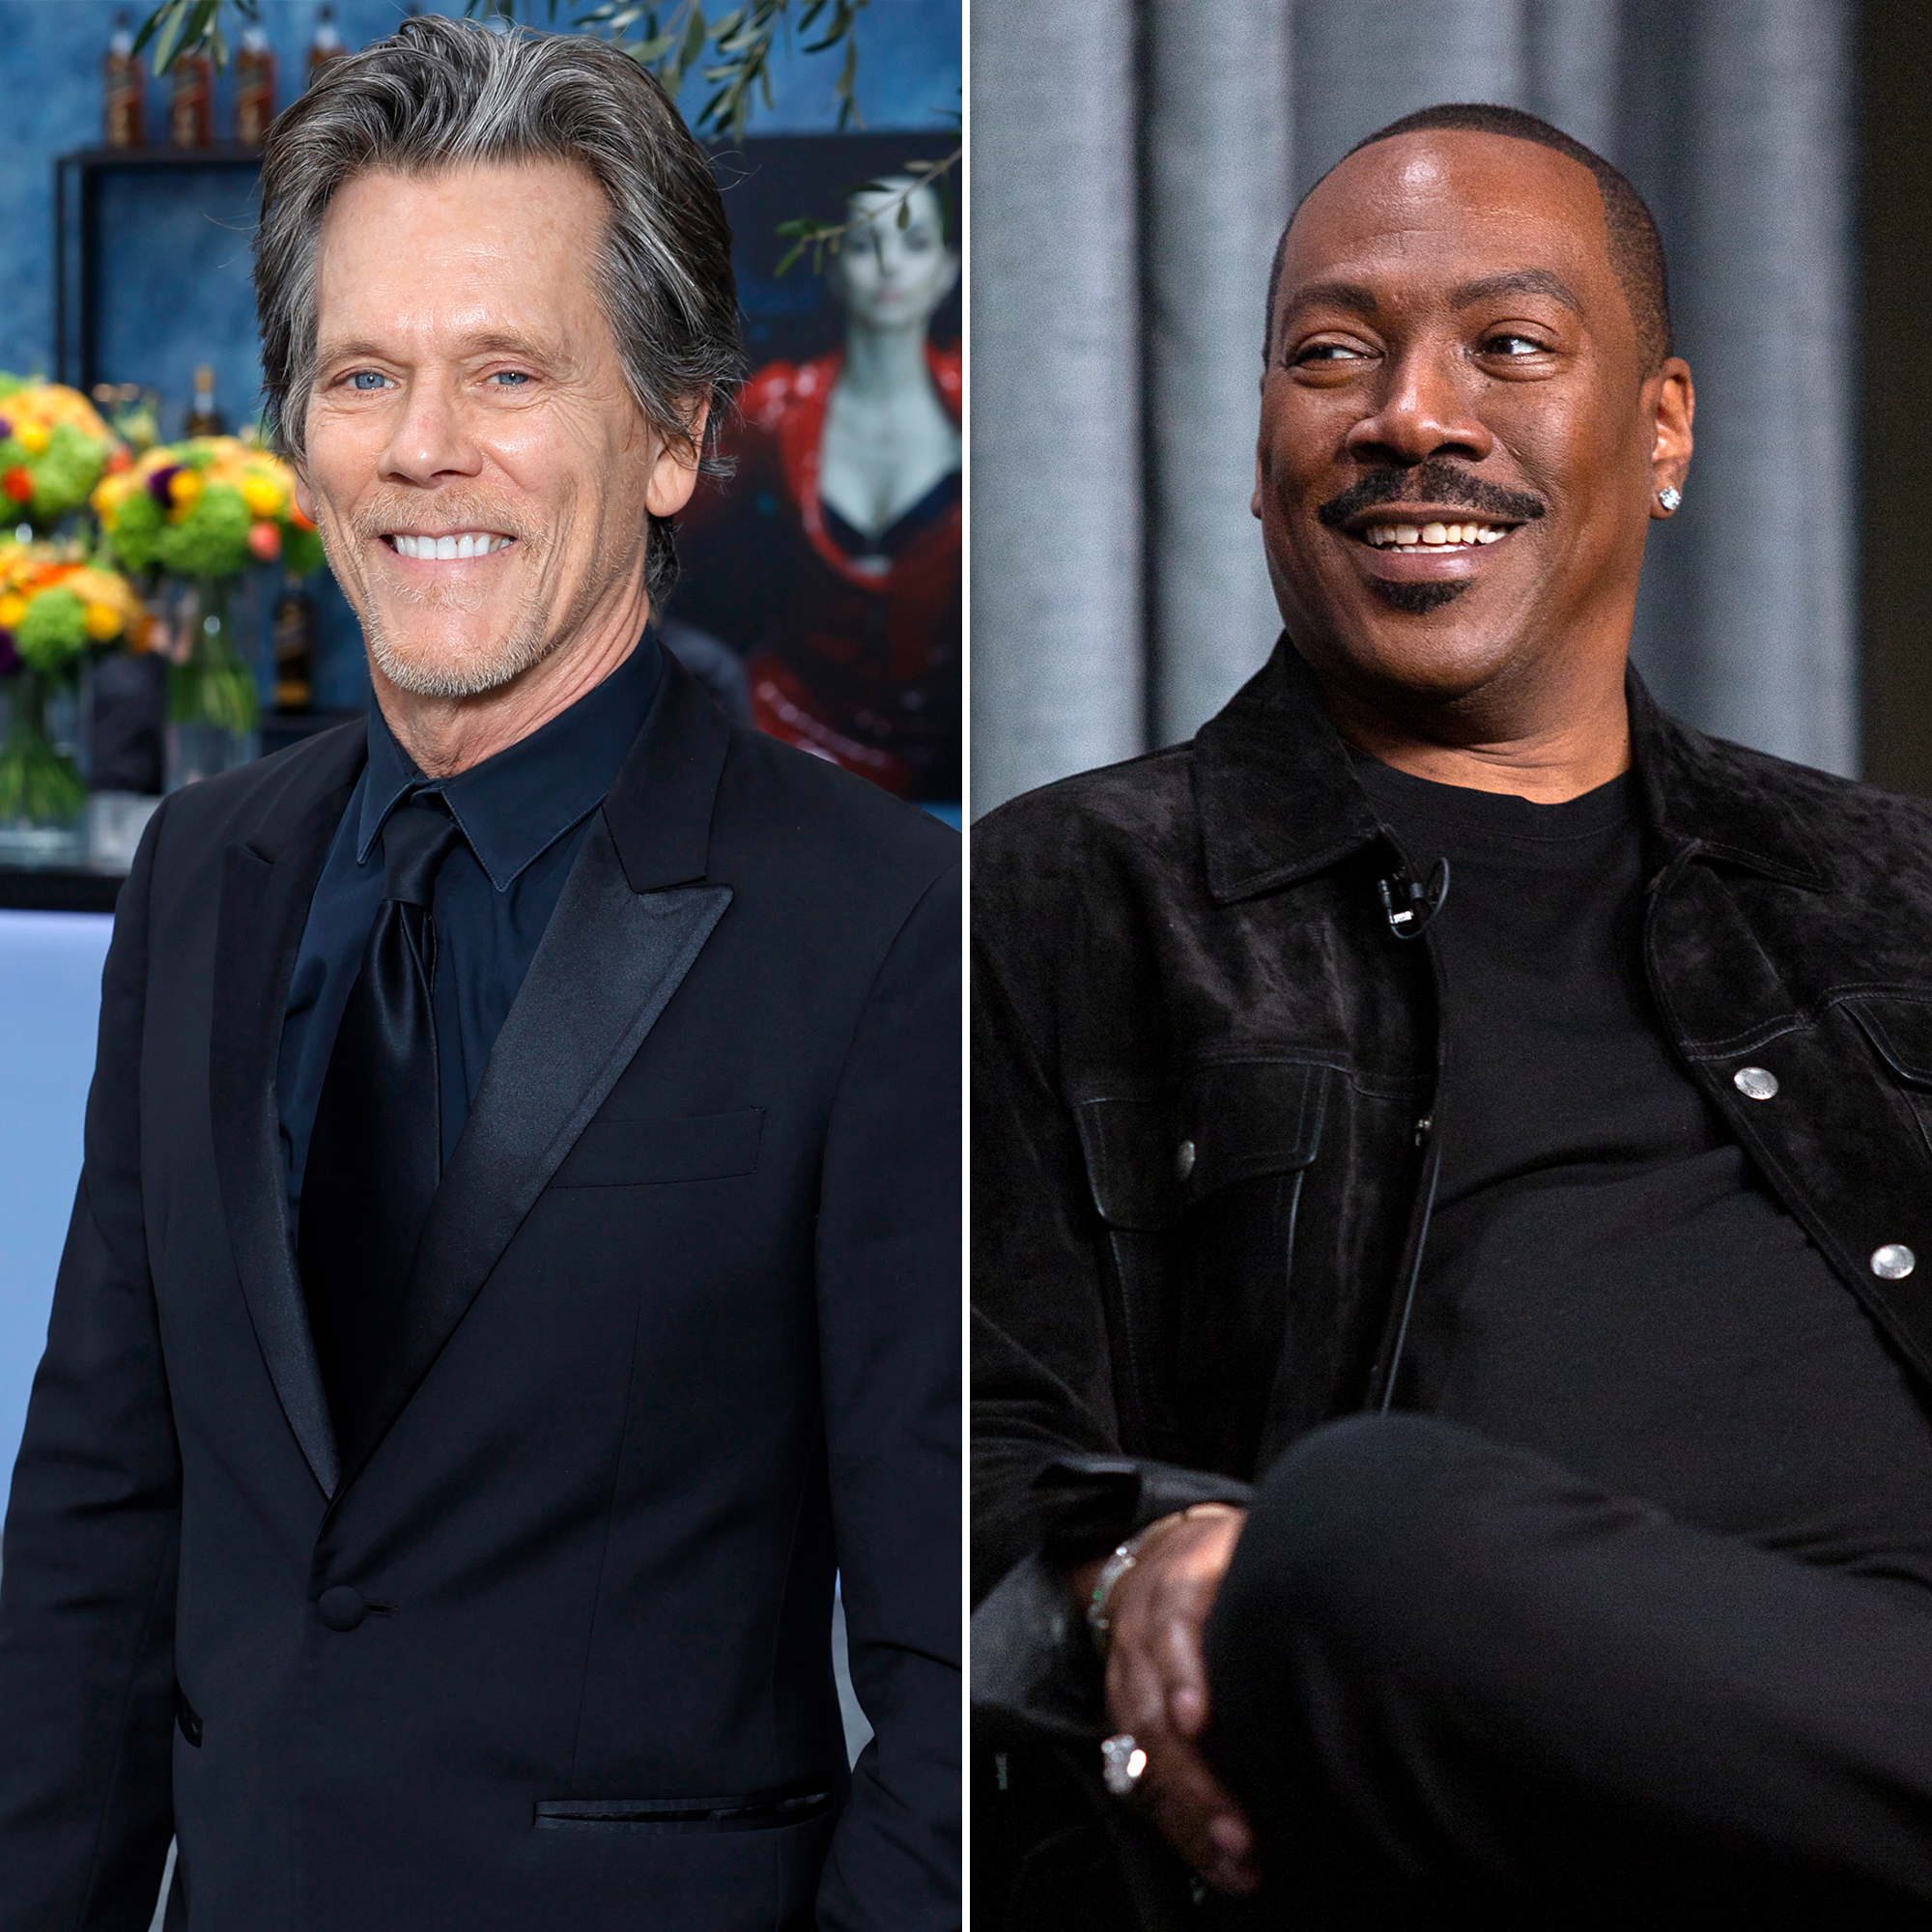 Kevin Bacon Gushes Over Working With Eddie Murphy: ‘Bucket List Thing’